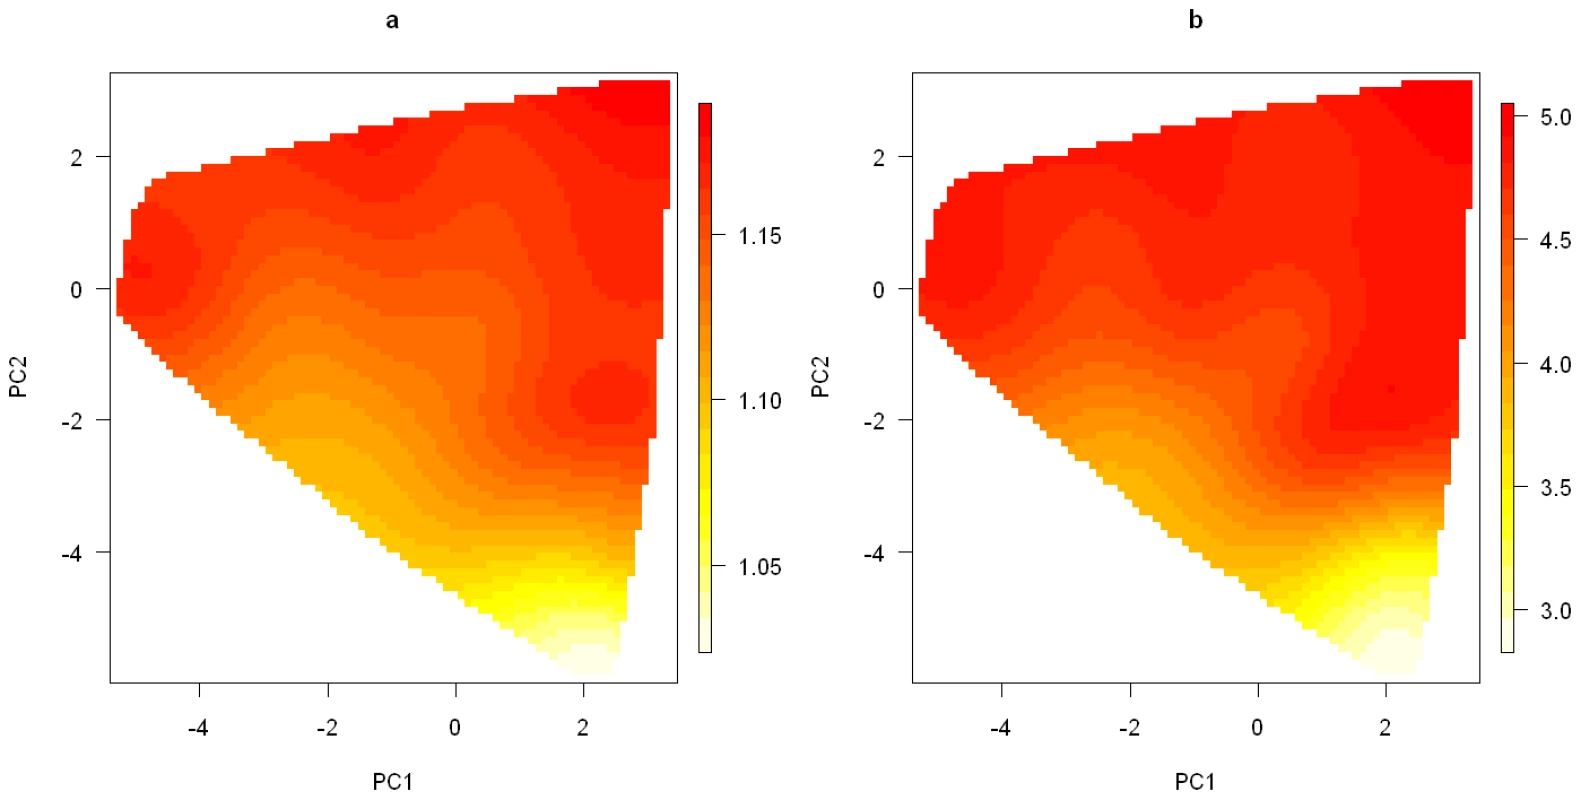 Smoothed surface plots of the posterior medians of the odds ratios for the genetic and smoking effects on the space of the first two principal components.